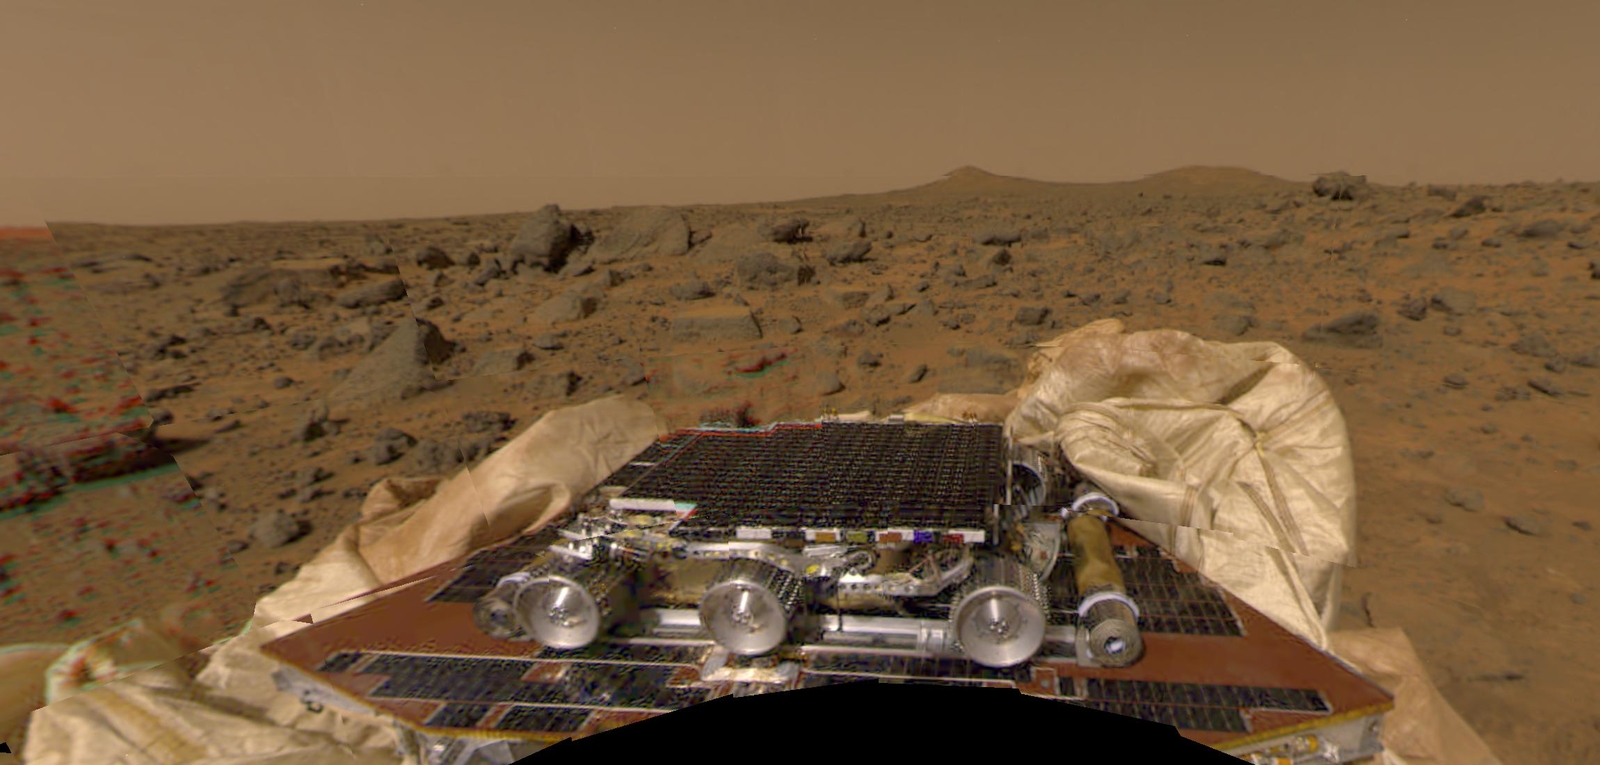 NASA's Sojourner rover and undeployed ramps onboard the Mars Pathfinder spacecraft can be seen in this image, by the Imager for Mars Pathfinder (IMP) on July 4, 1997 (Sol 1).